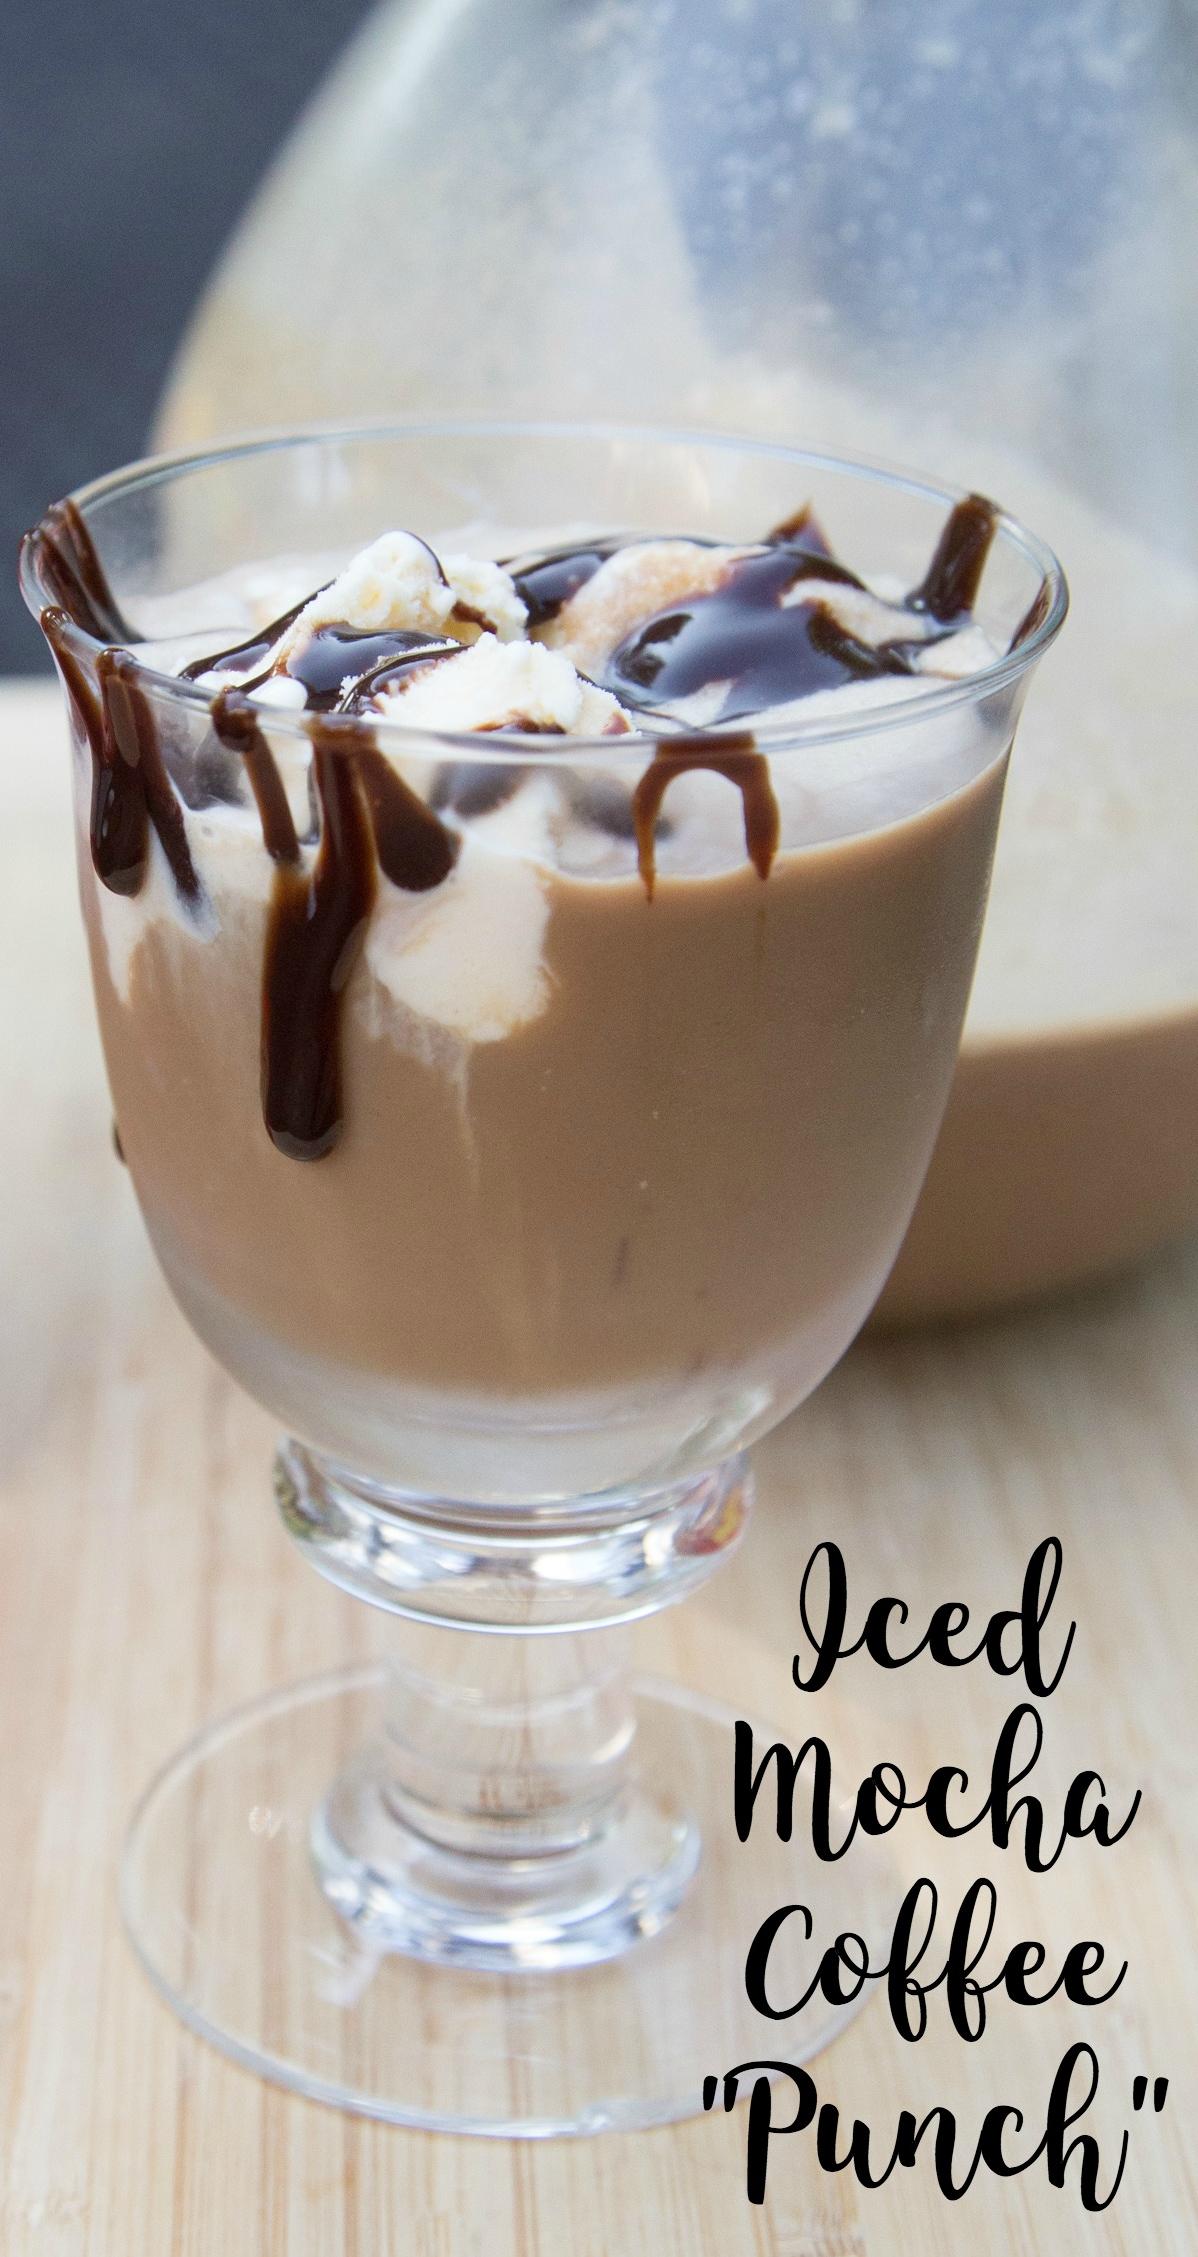  A creamy and chocolatey concoction that will be gone before you know it